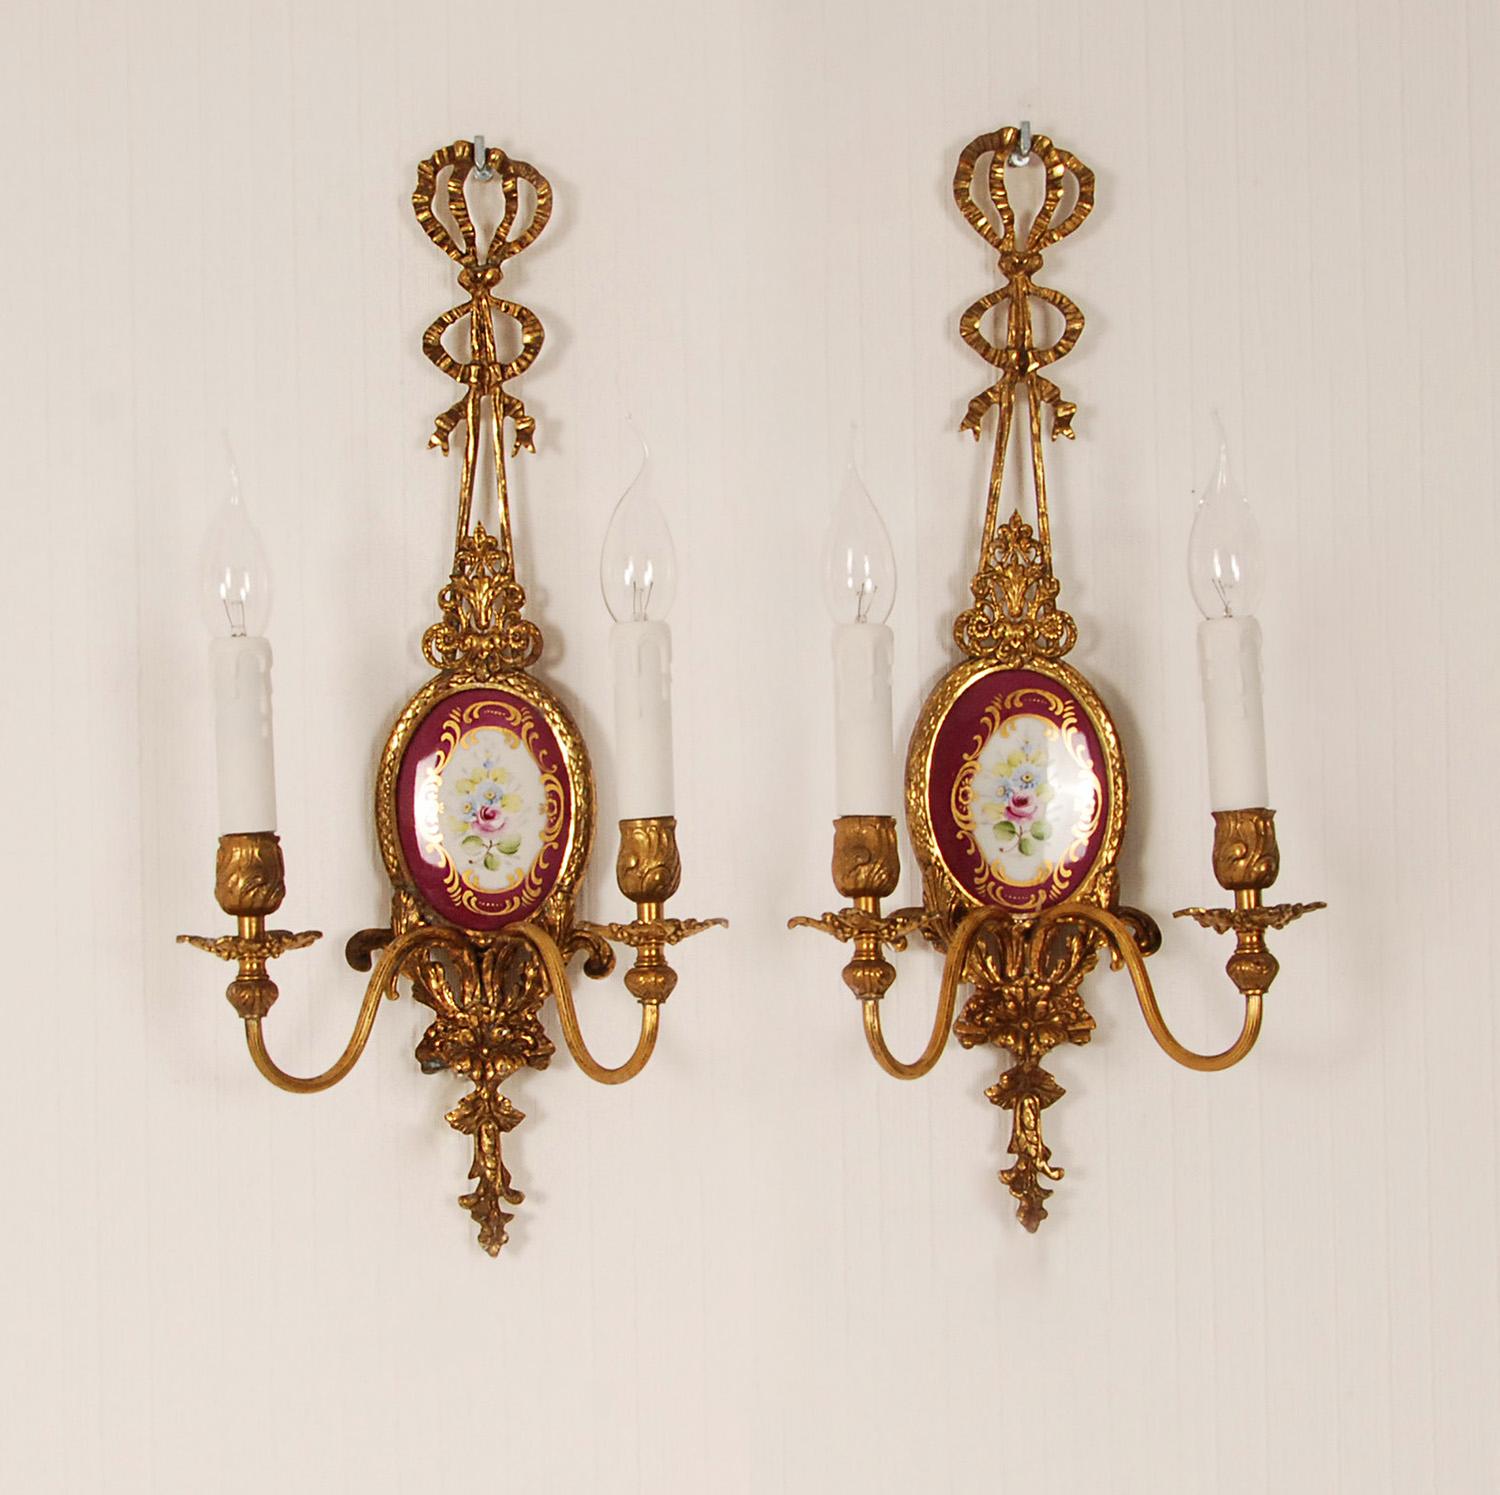 Vintage Wall Lamps Gold Gilt Bronze Ribbons Porcelain Neoclassical sconces pair  In Good Condition For Sale In Wommelgem, VAN